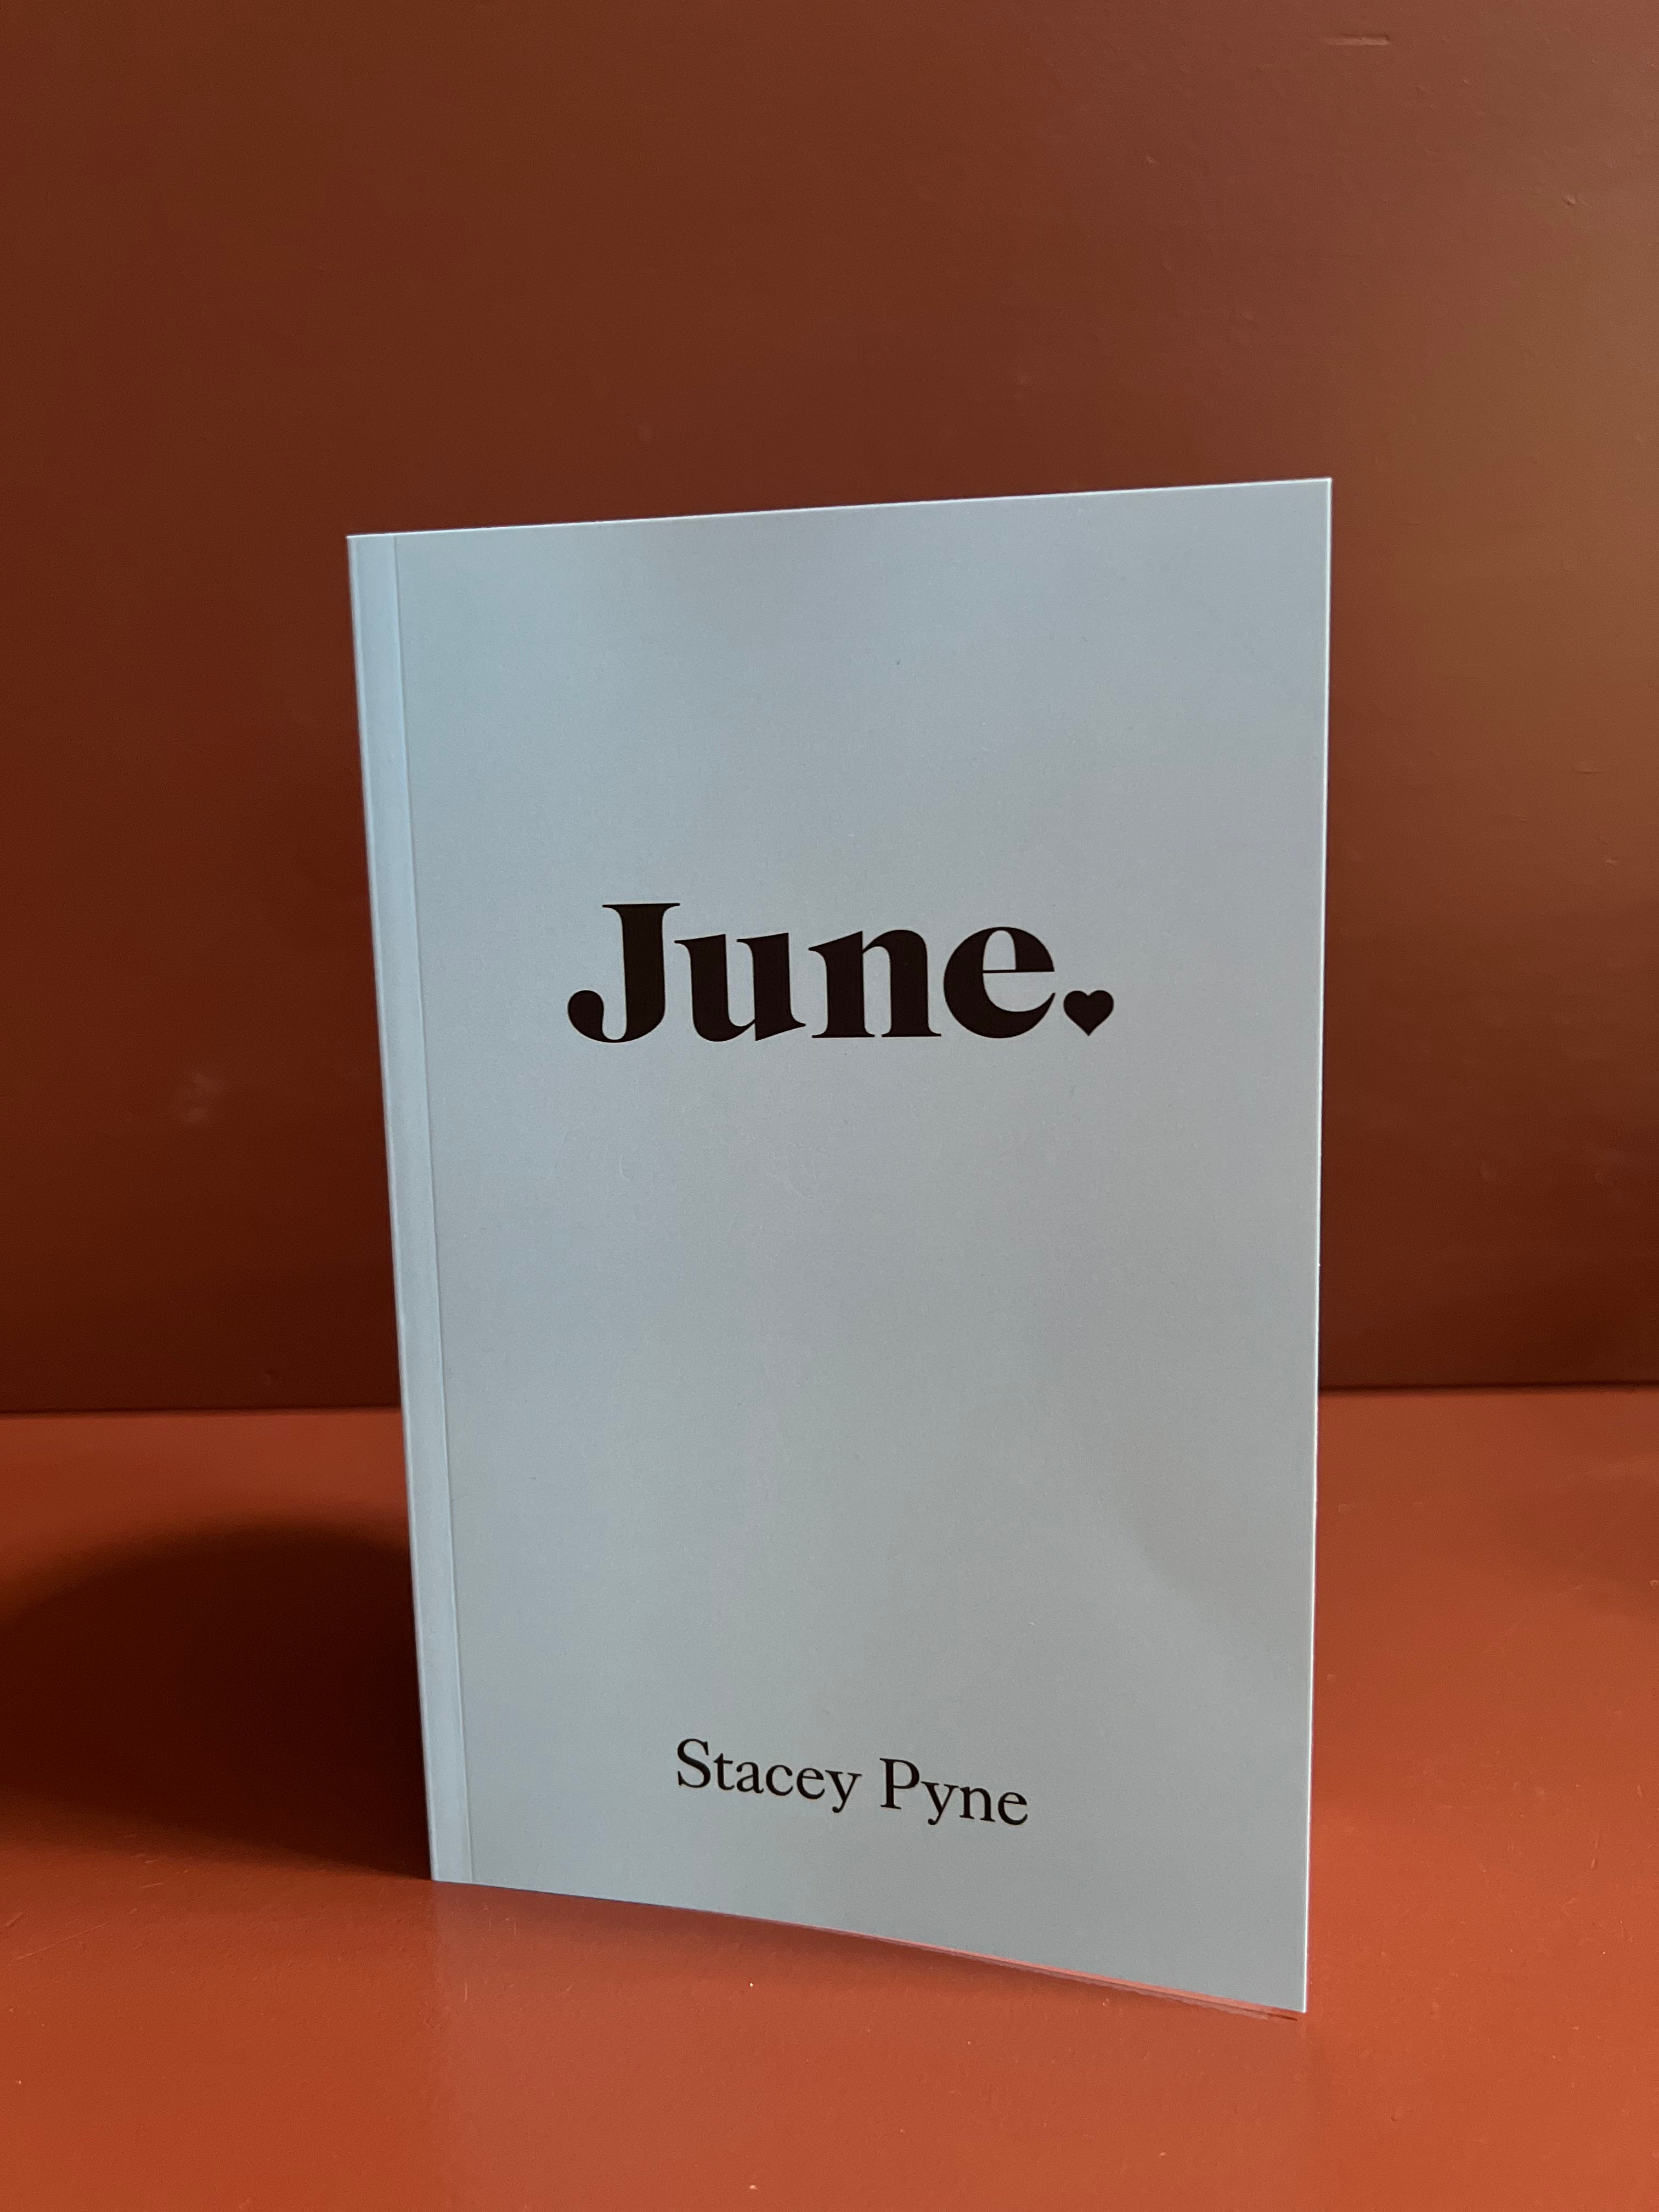 June 🖤by Stacey Pyne